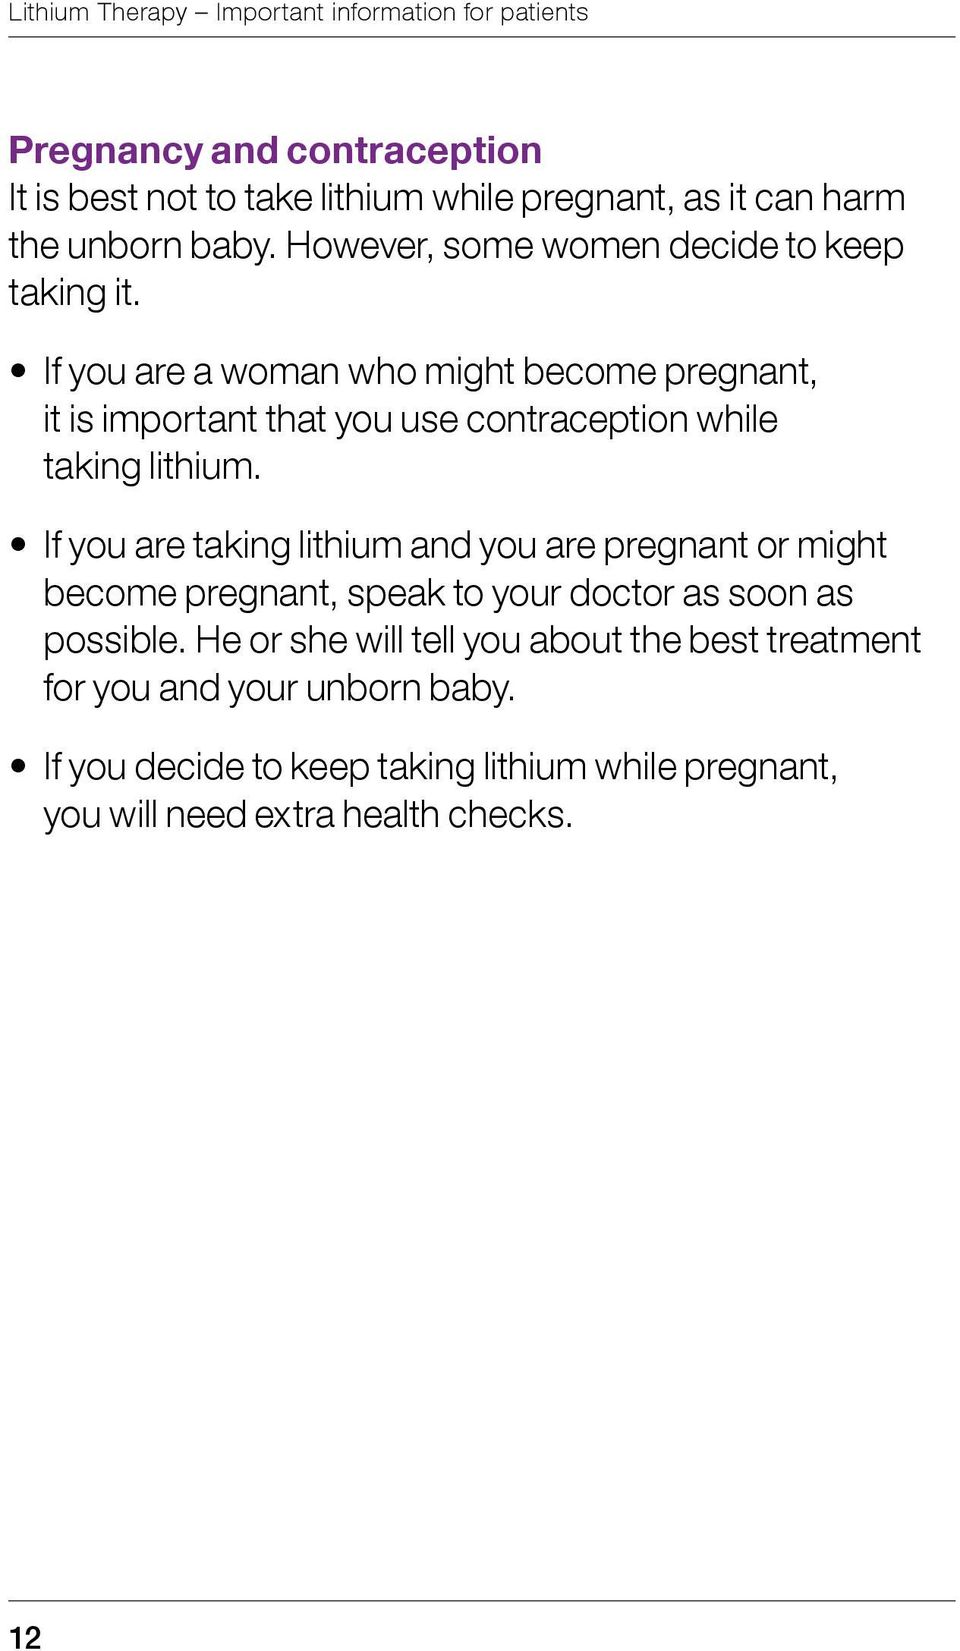 If you are a woman who might become pregnant, it is important that you use contraception while taking lithium.